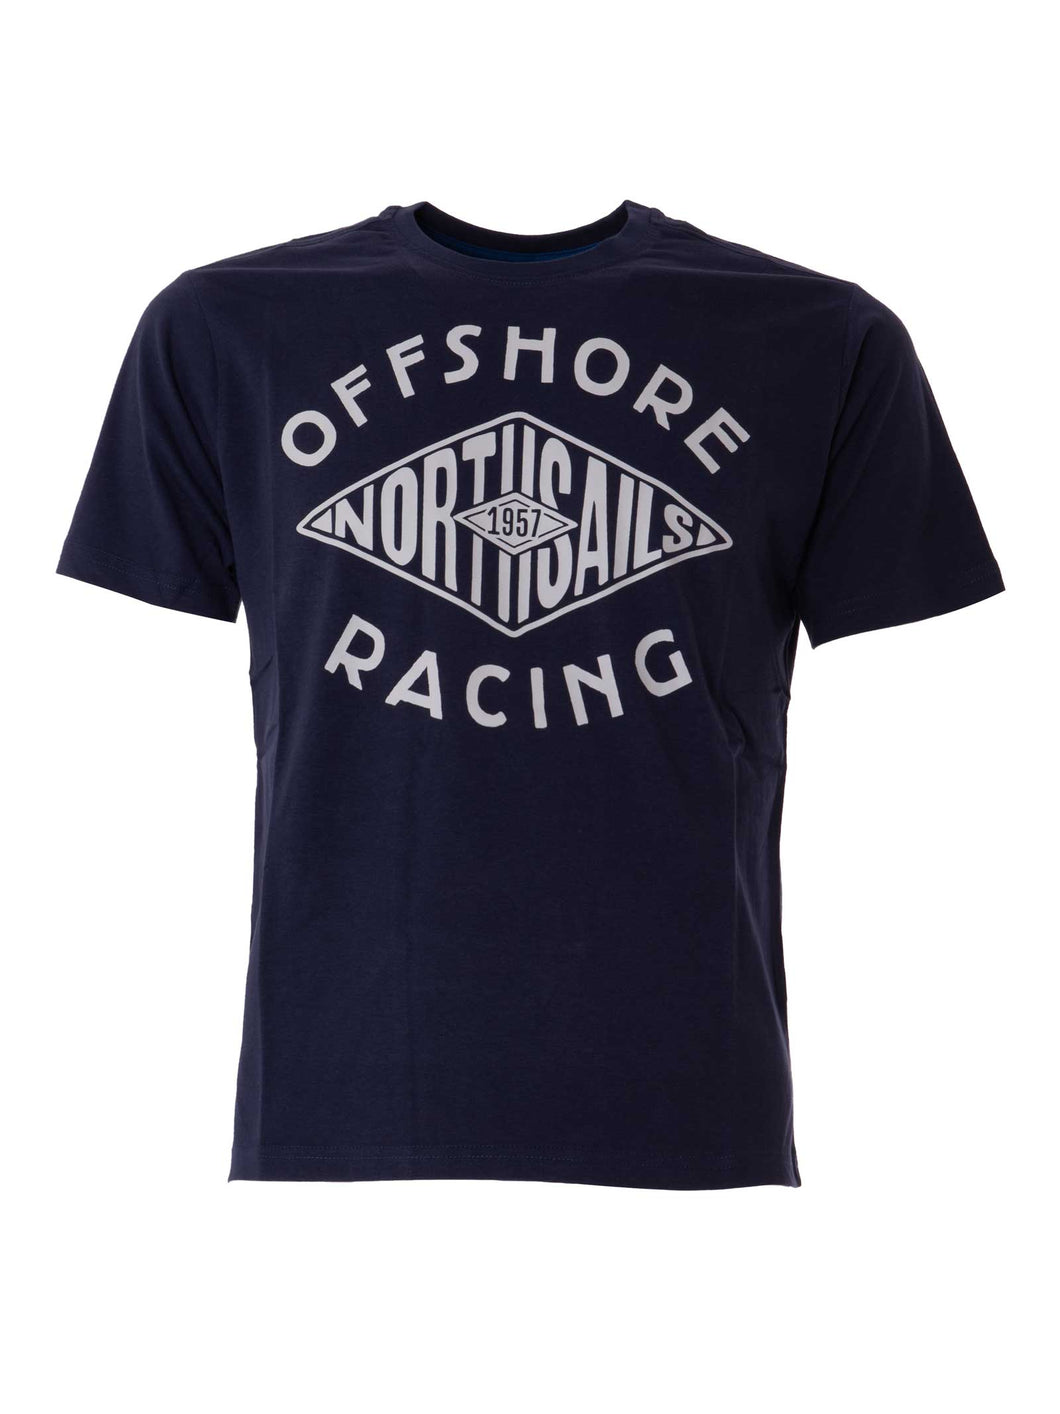 North Sails, Navy T-Shirt With Design On Front